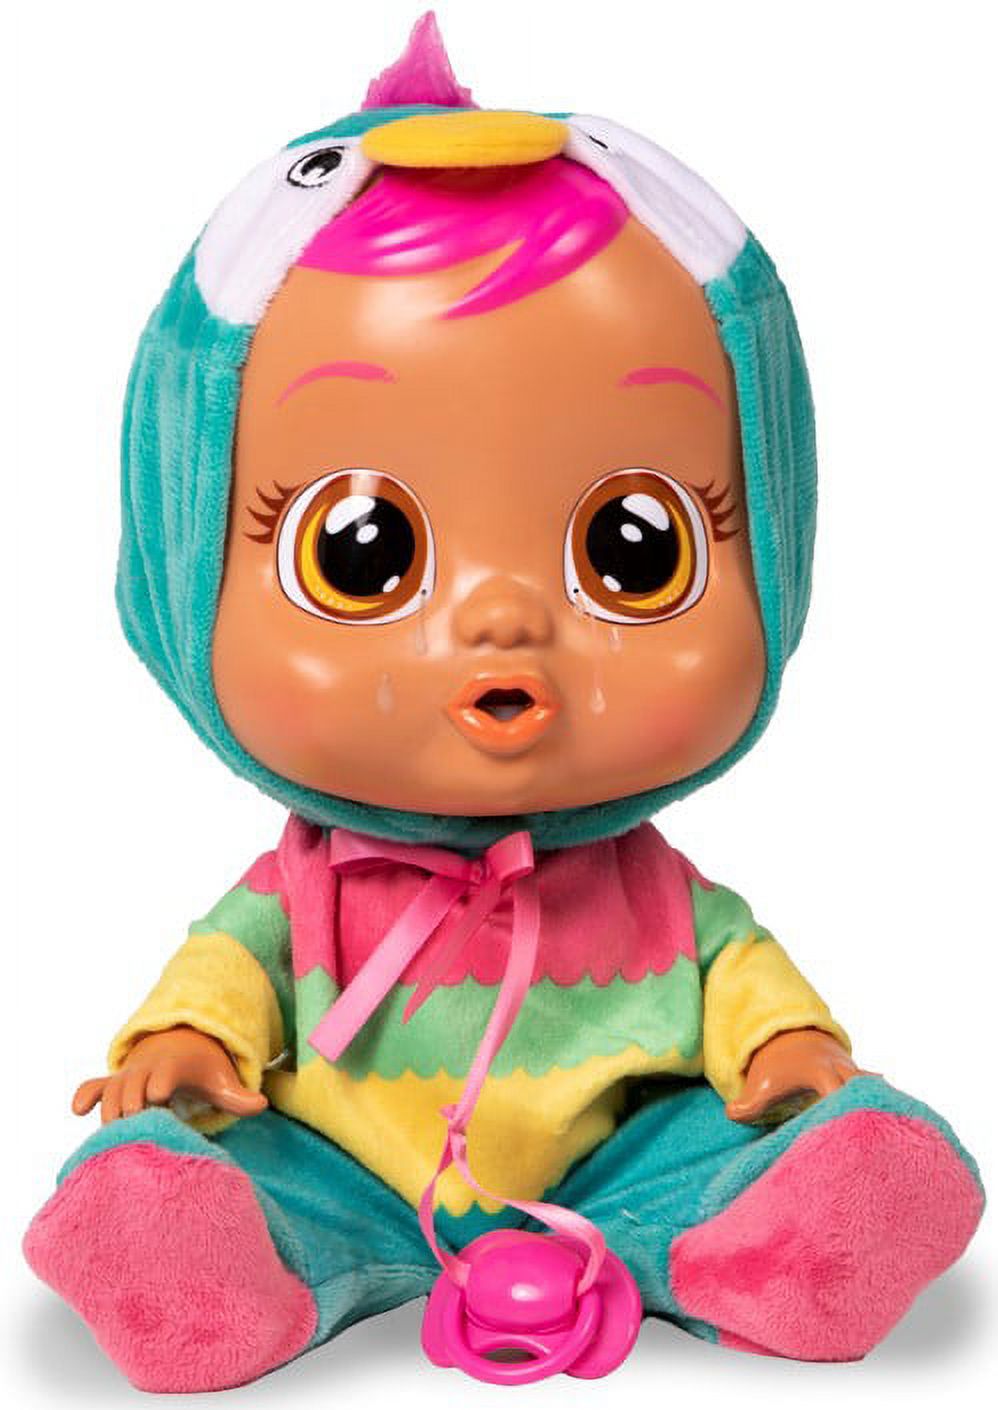 Cry Babies Loretta Baby Doll - image 1 of 5